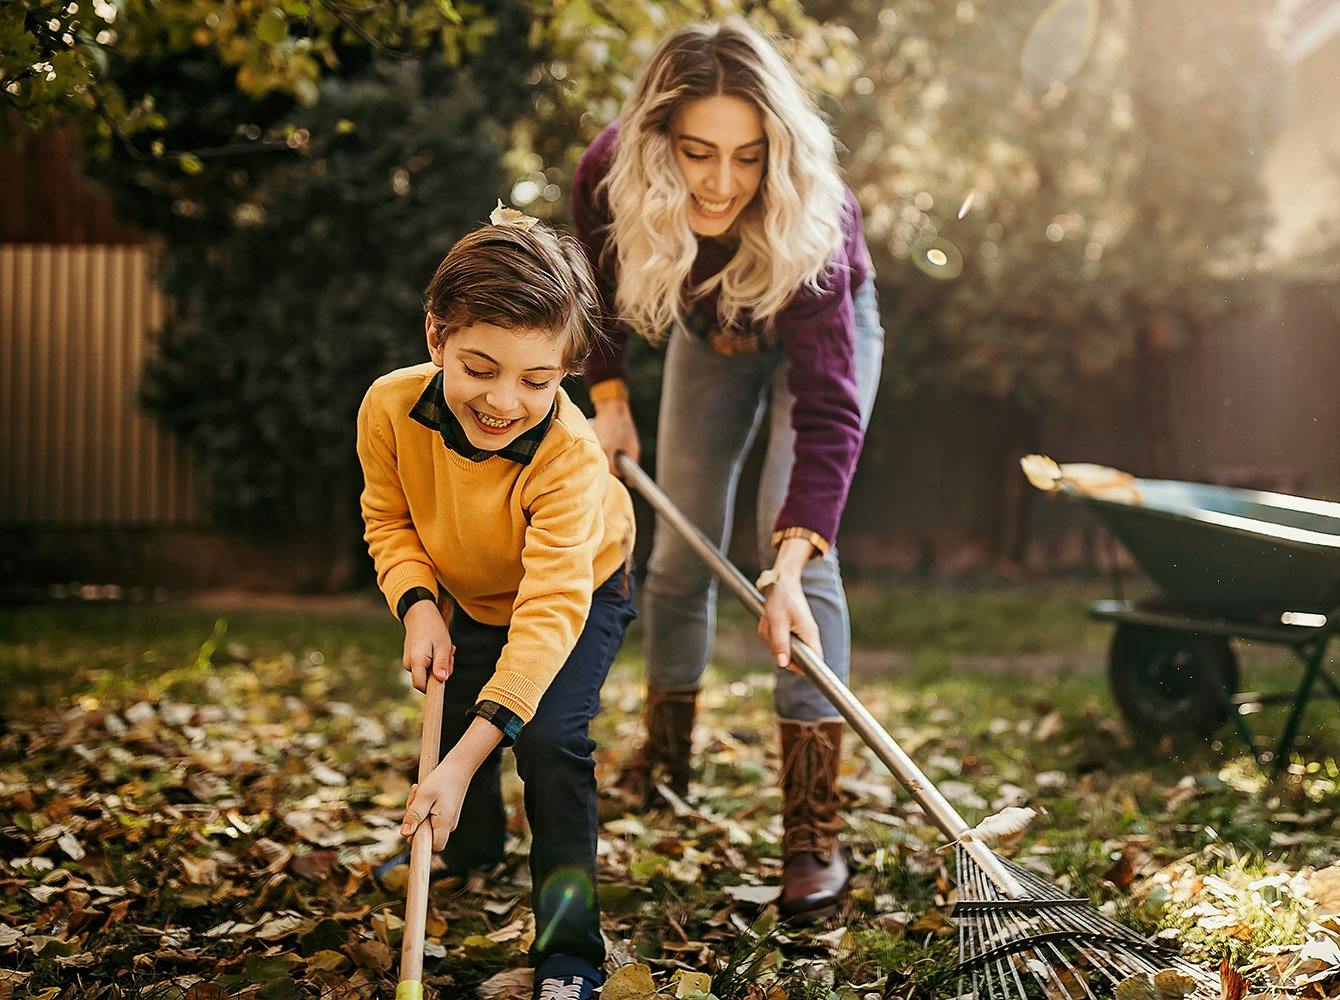 A woman and boy smiling and raking leaves